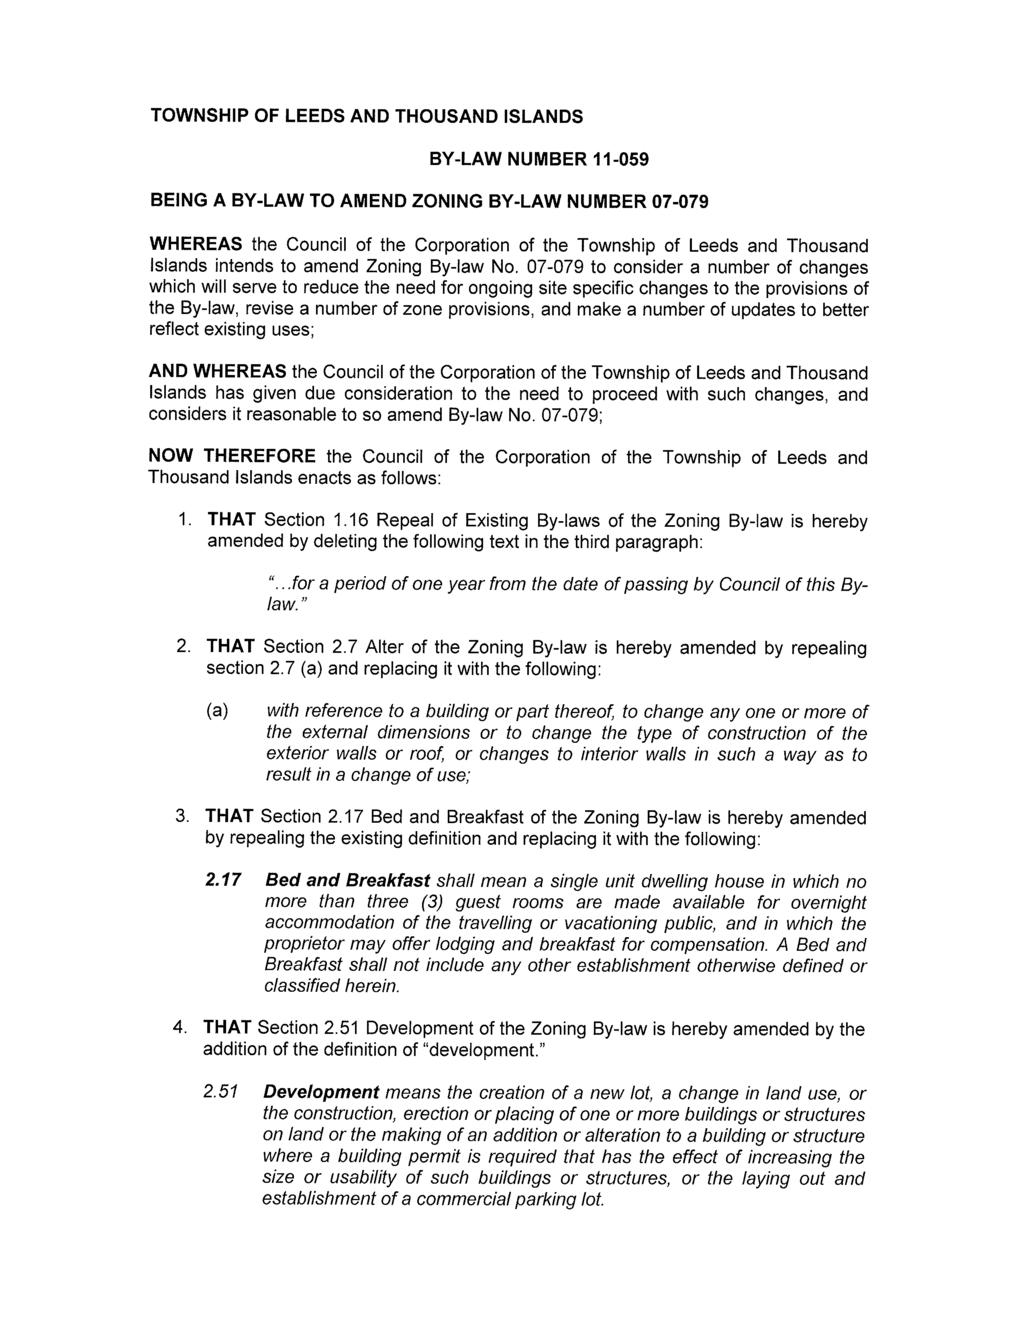 TOWNSHIP OF LEEDS AND THOUSAND ISLANDS BY-LAW NUMBER 11-059 BEING A BY-LAW TO AMEND ZONING BY-LAW NUMBER 07-079 WHEREAS the Council of the Corporation of the Township of Leeds and Thousand Islands